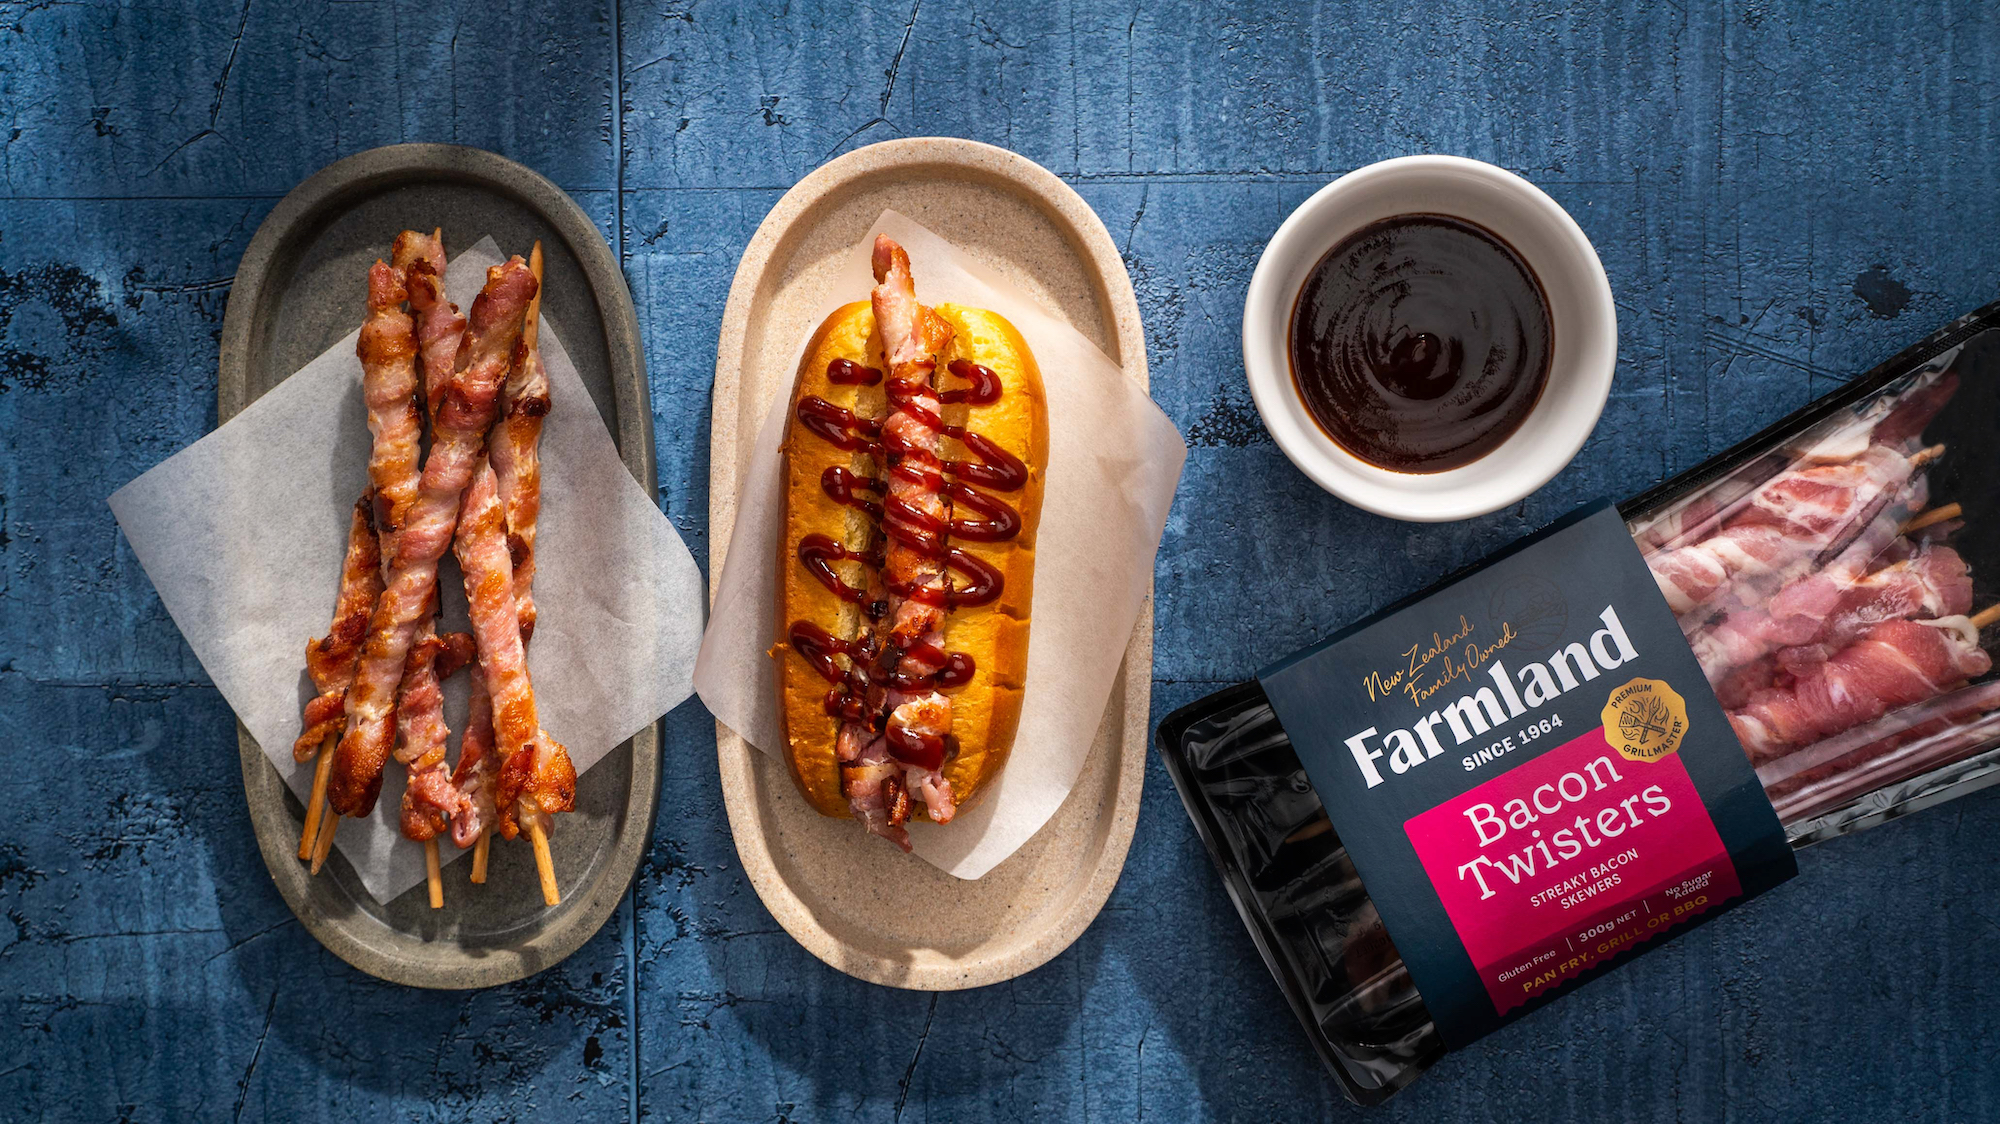 May must-haves 2023 - Farmland bacon twisters shown in the packet, cooked on a plate, and in a bread roll on a plate with a small dish of sauce